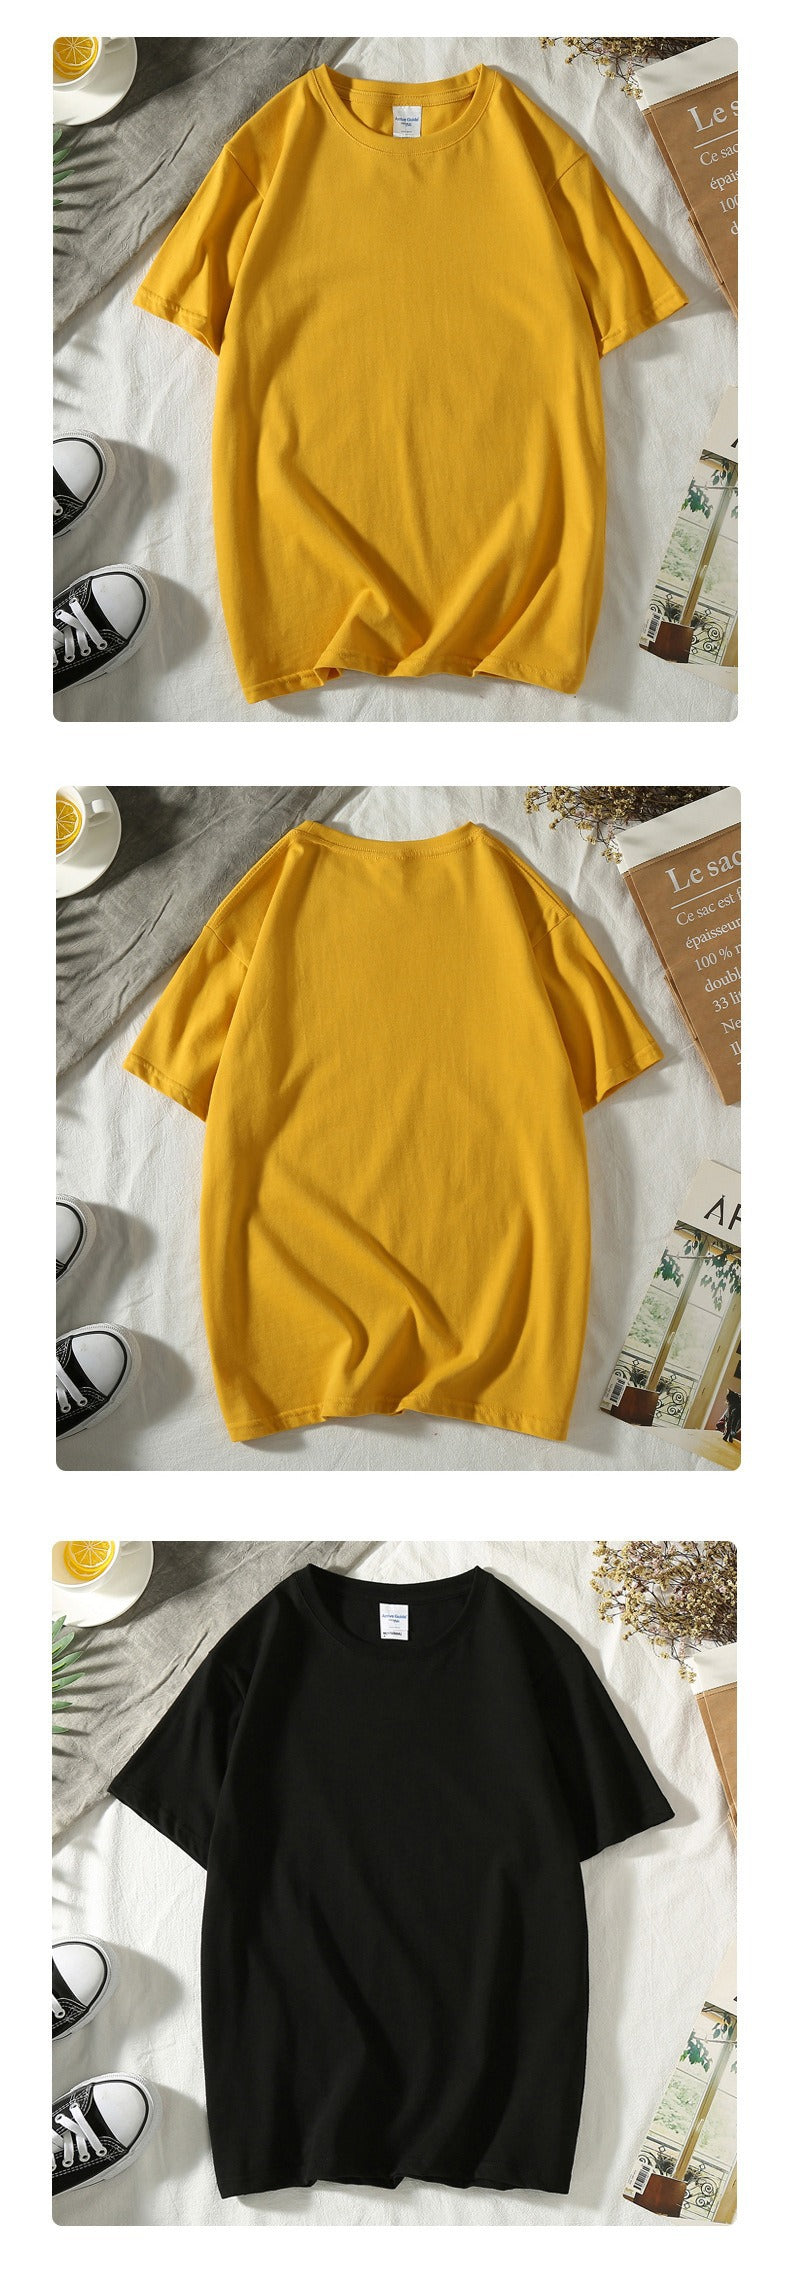 Customized LOGO/Pattern Adult 240g 16 Sticks 100% Cotton Round Neck EUR Size T-shirt For Men and Women (Instock) CST-032 AG240G